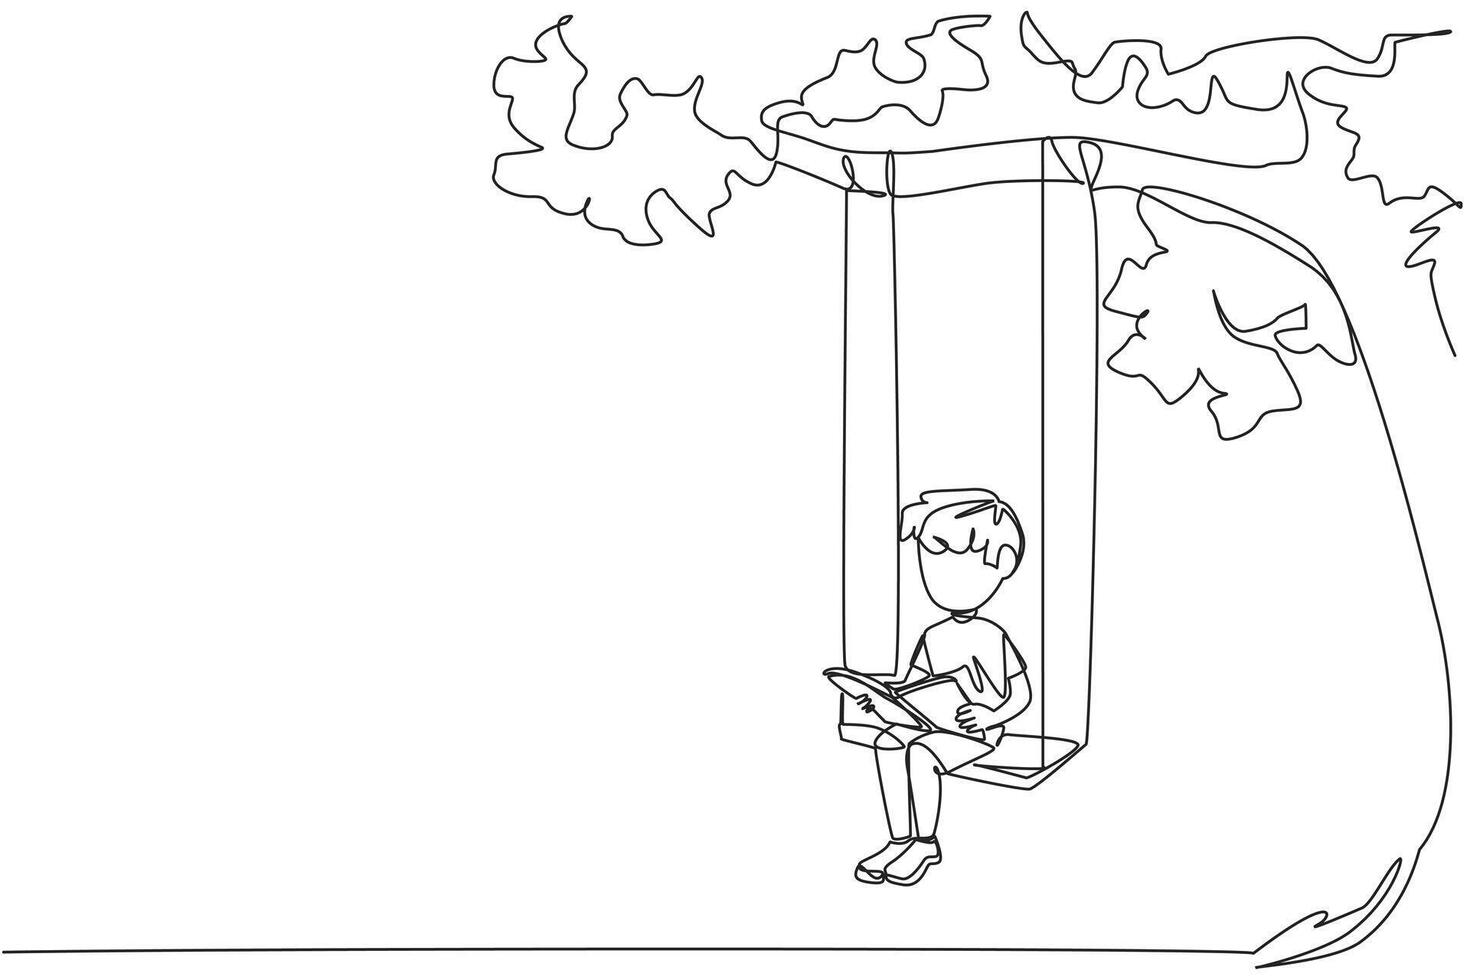 Single continuous line drawing boy sitting on a swing under a shady tree reading a book. High enthusiasm for reading. Read anywhere. Reading increases insight. One line design illustration vector